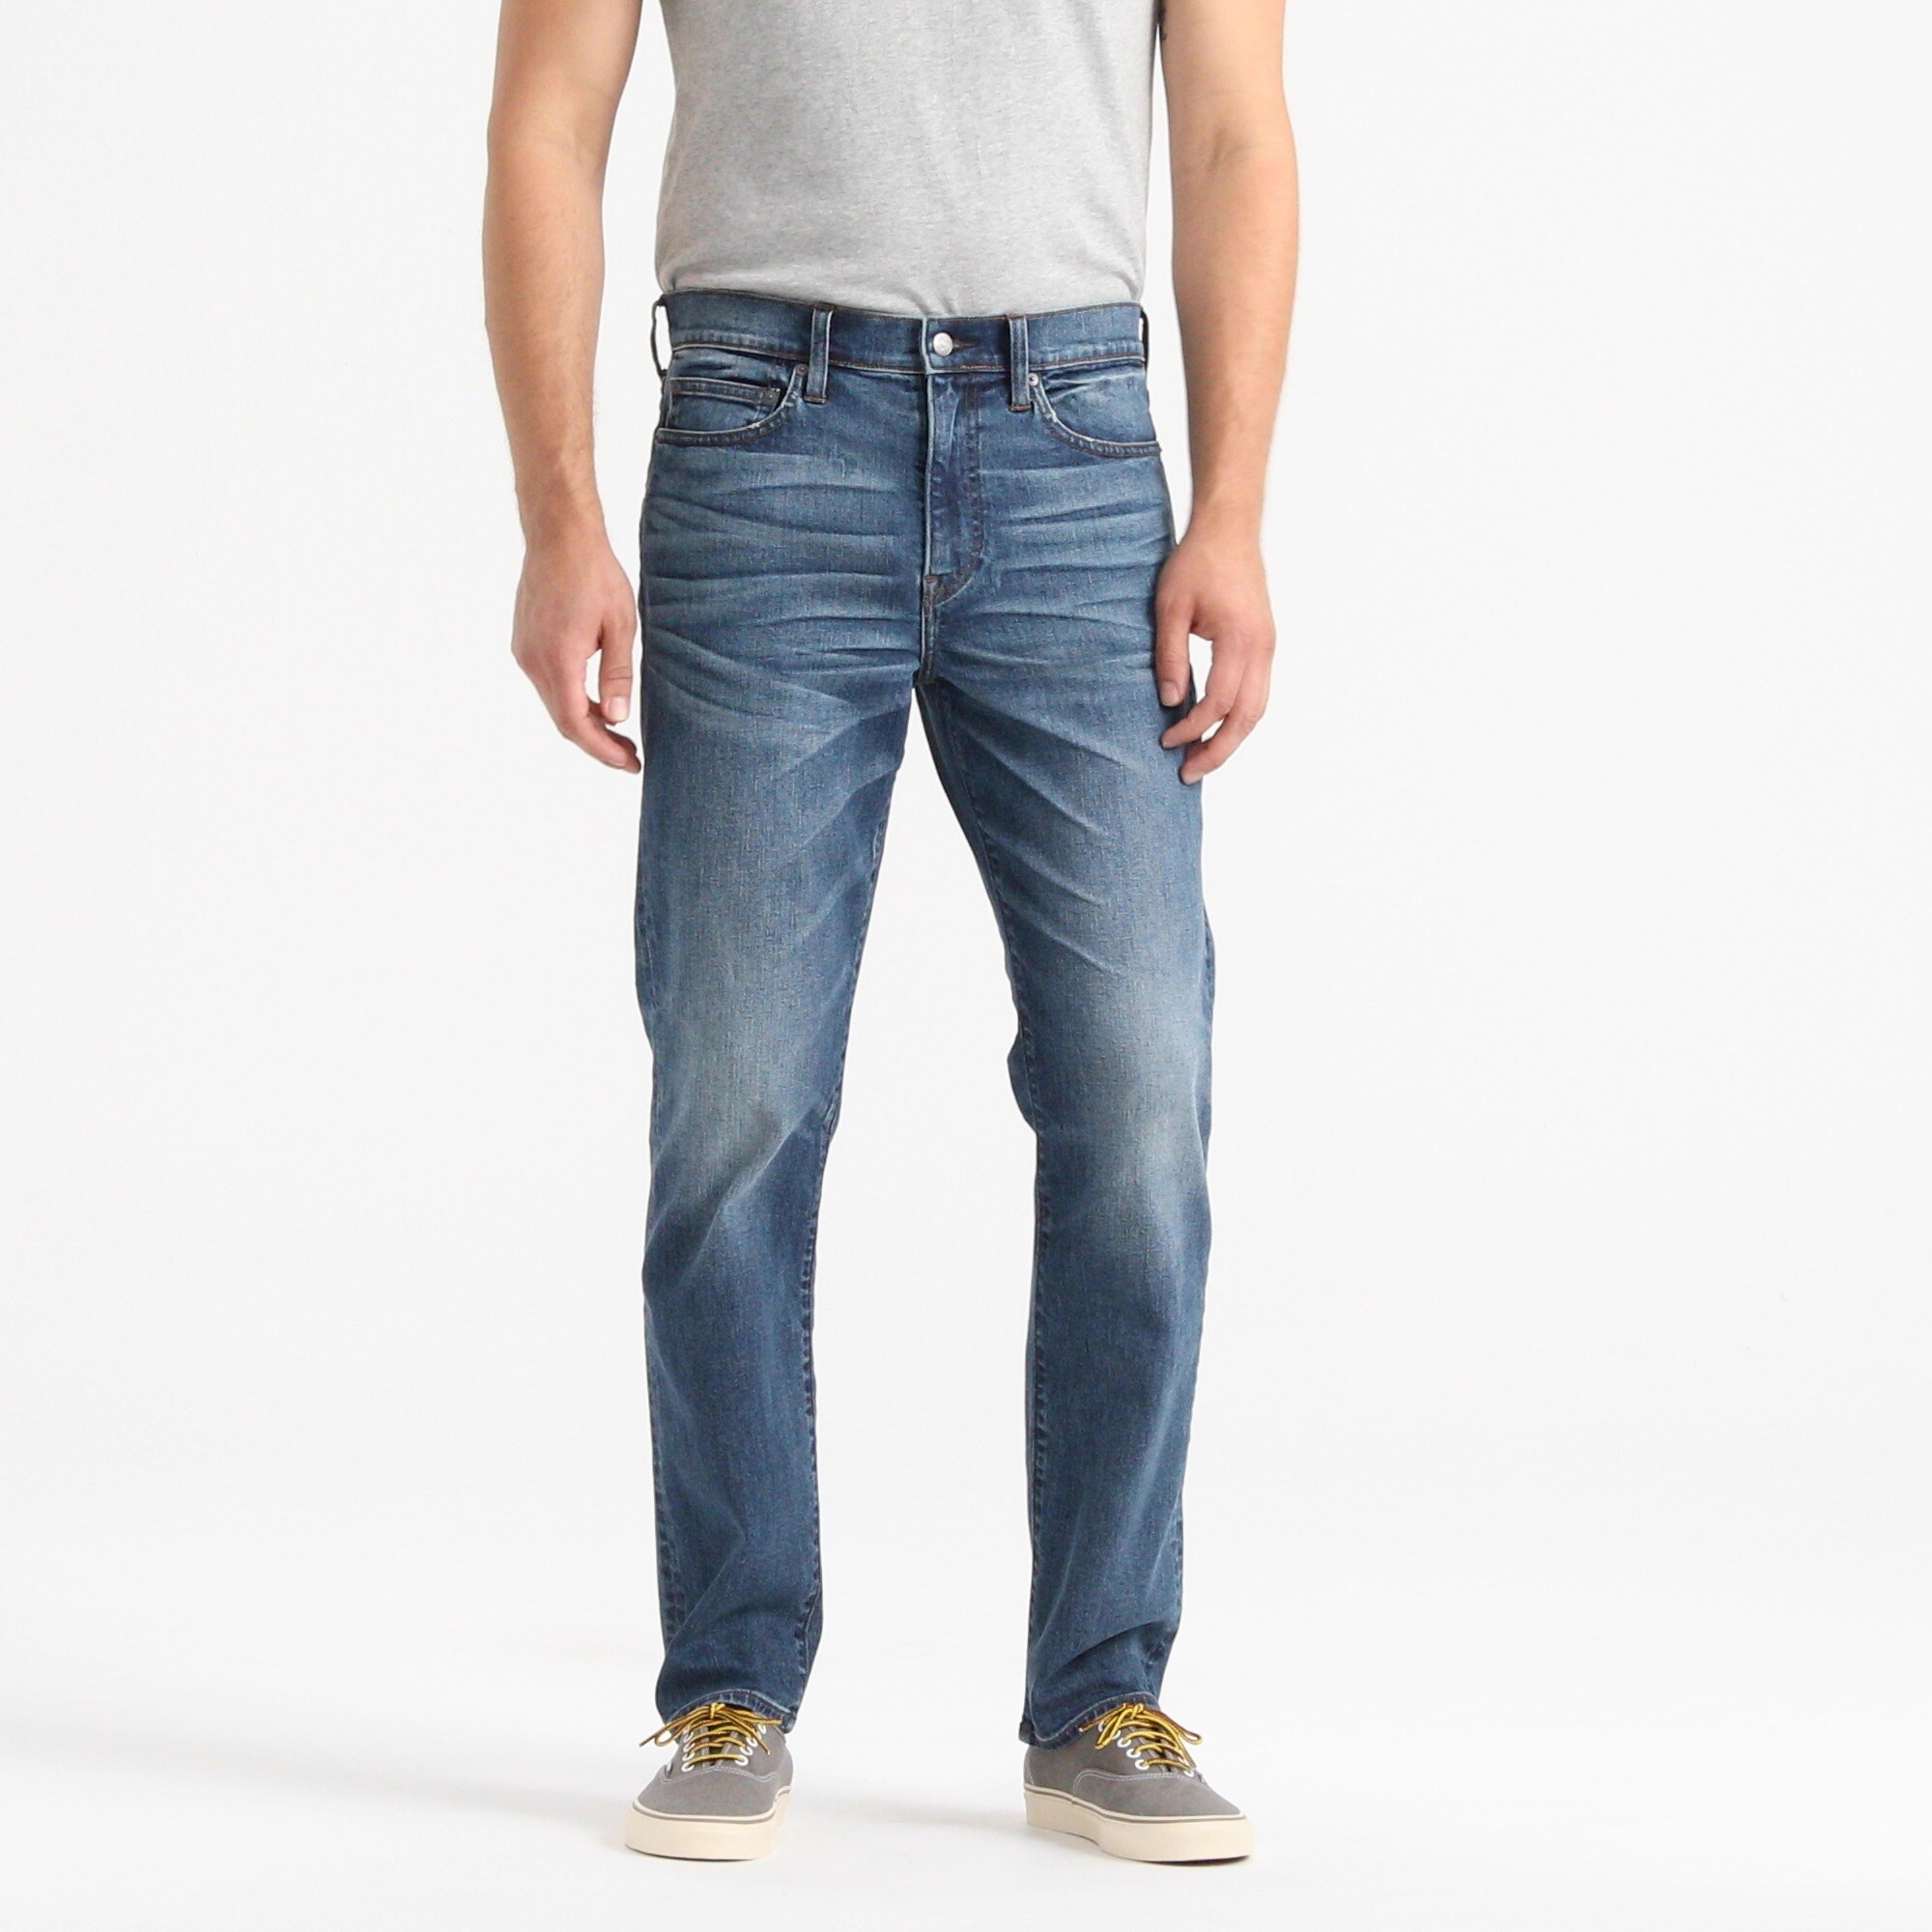 most popular american eagle jeans